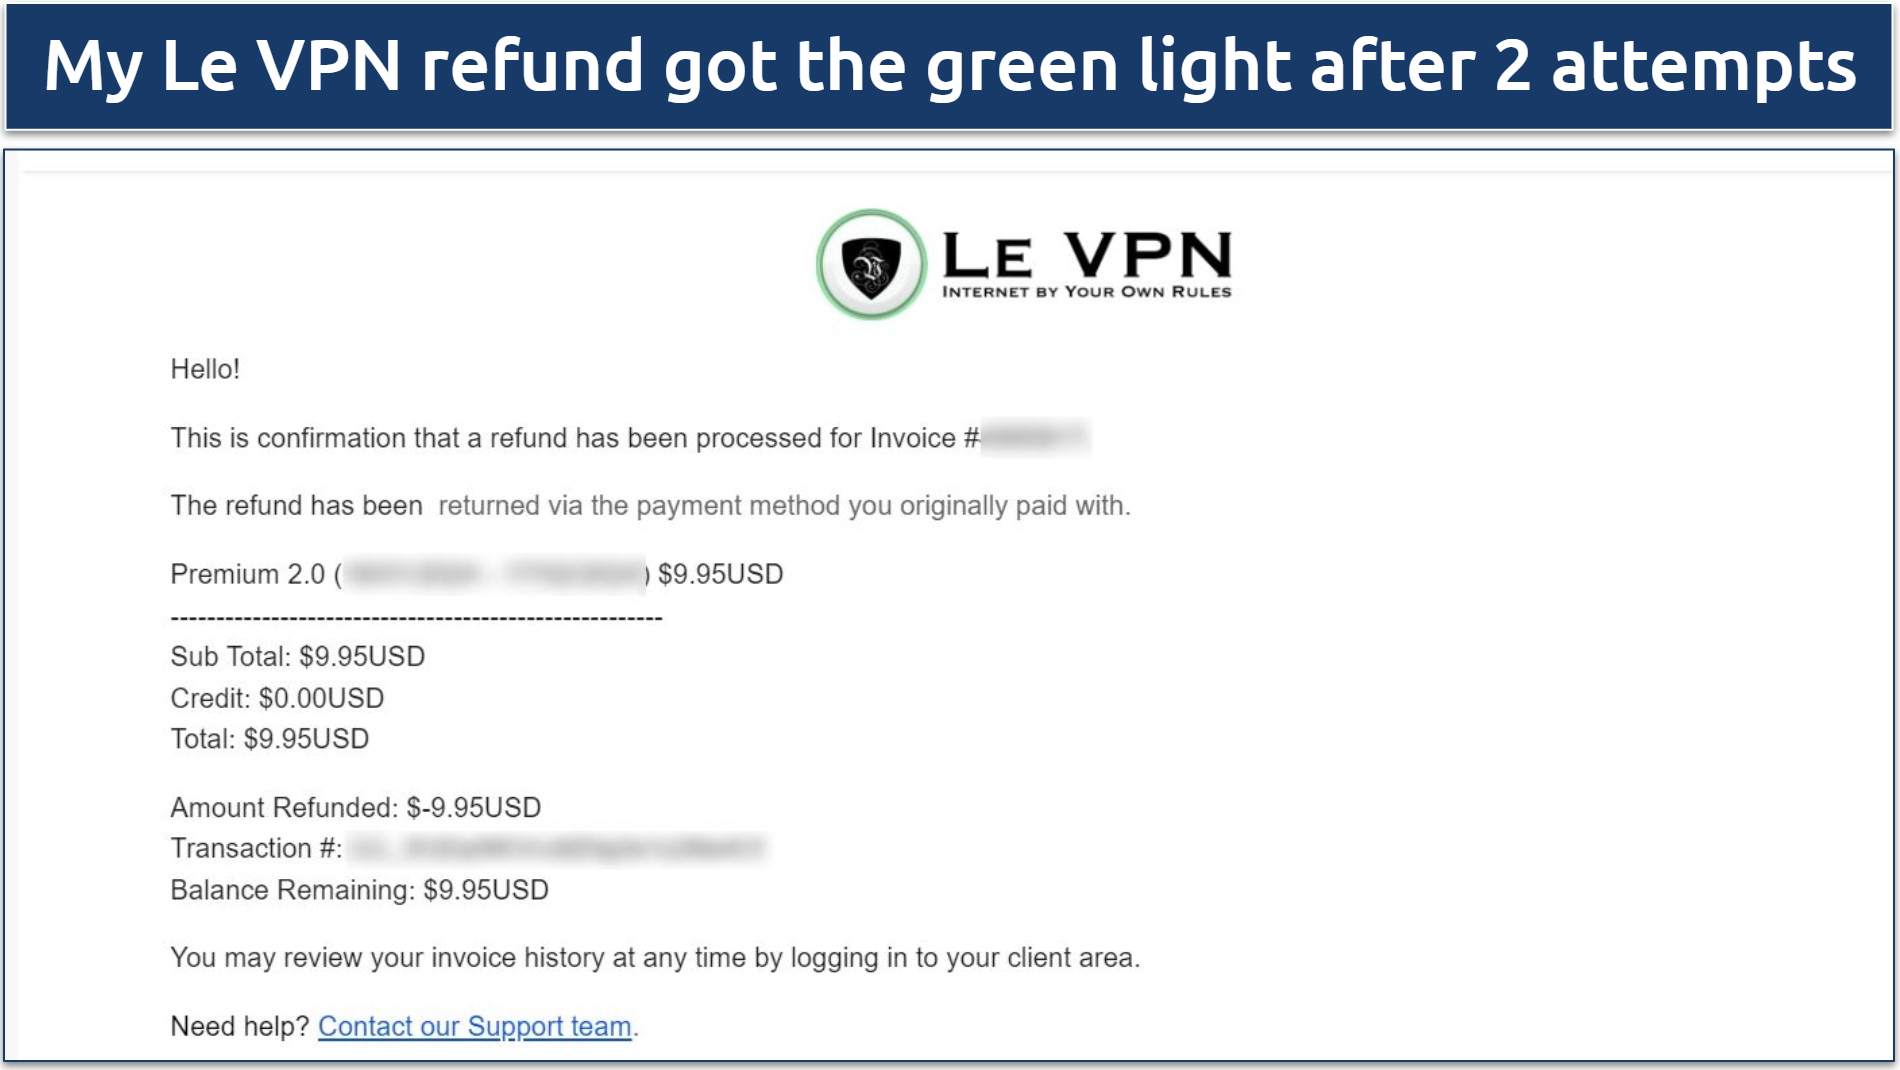 A screenshot showing Le VPN's commitment to its advertised refund policy